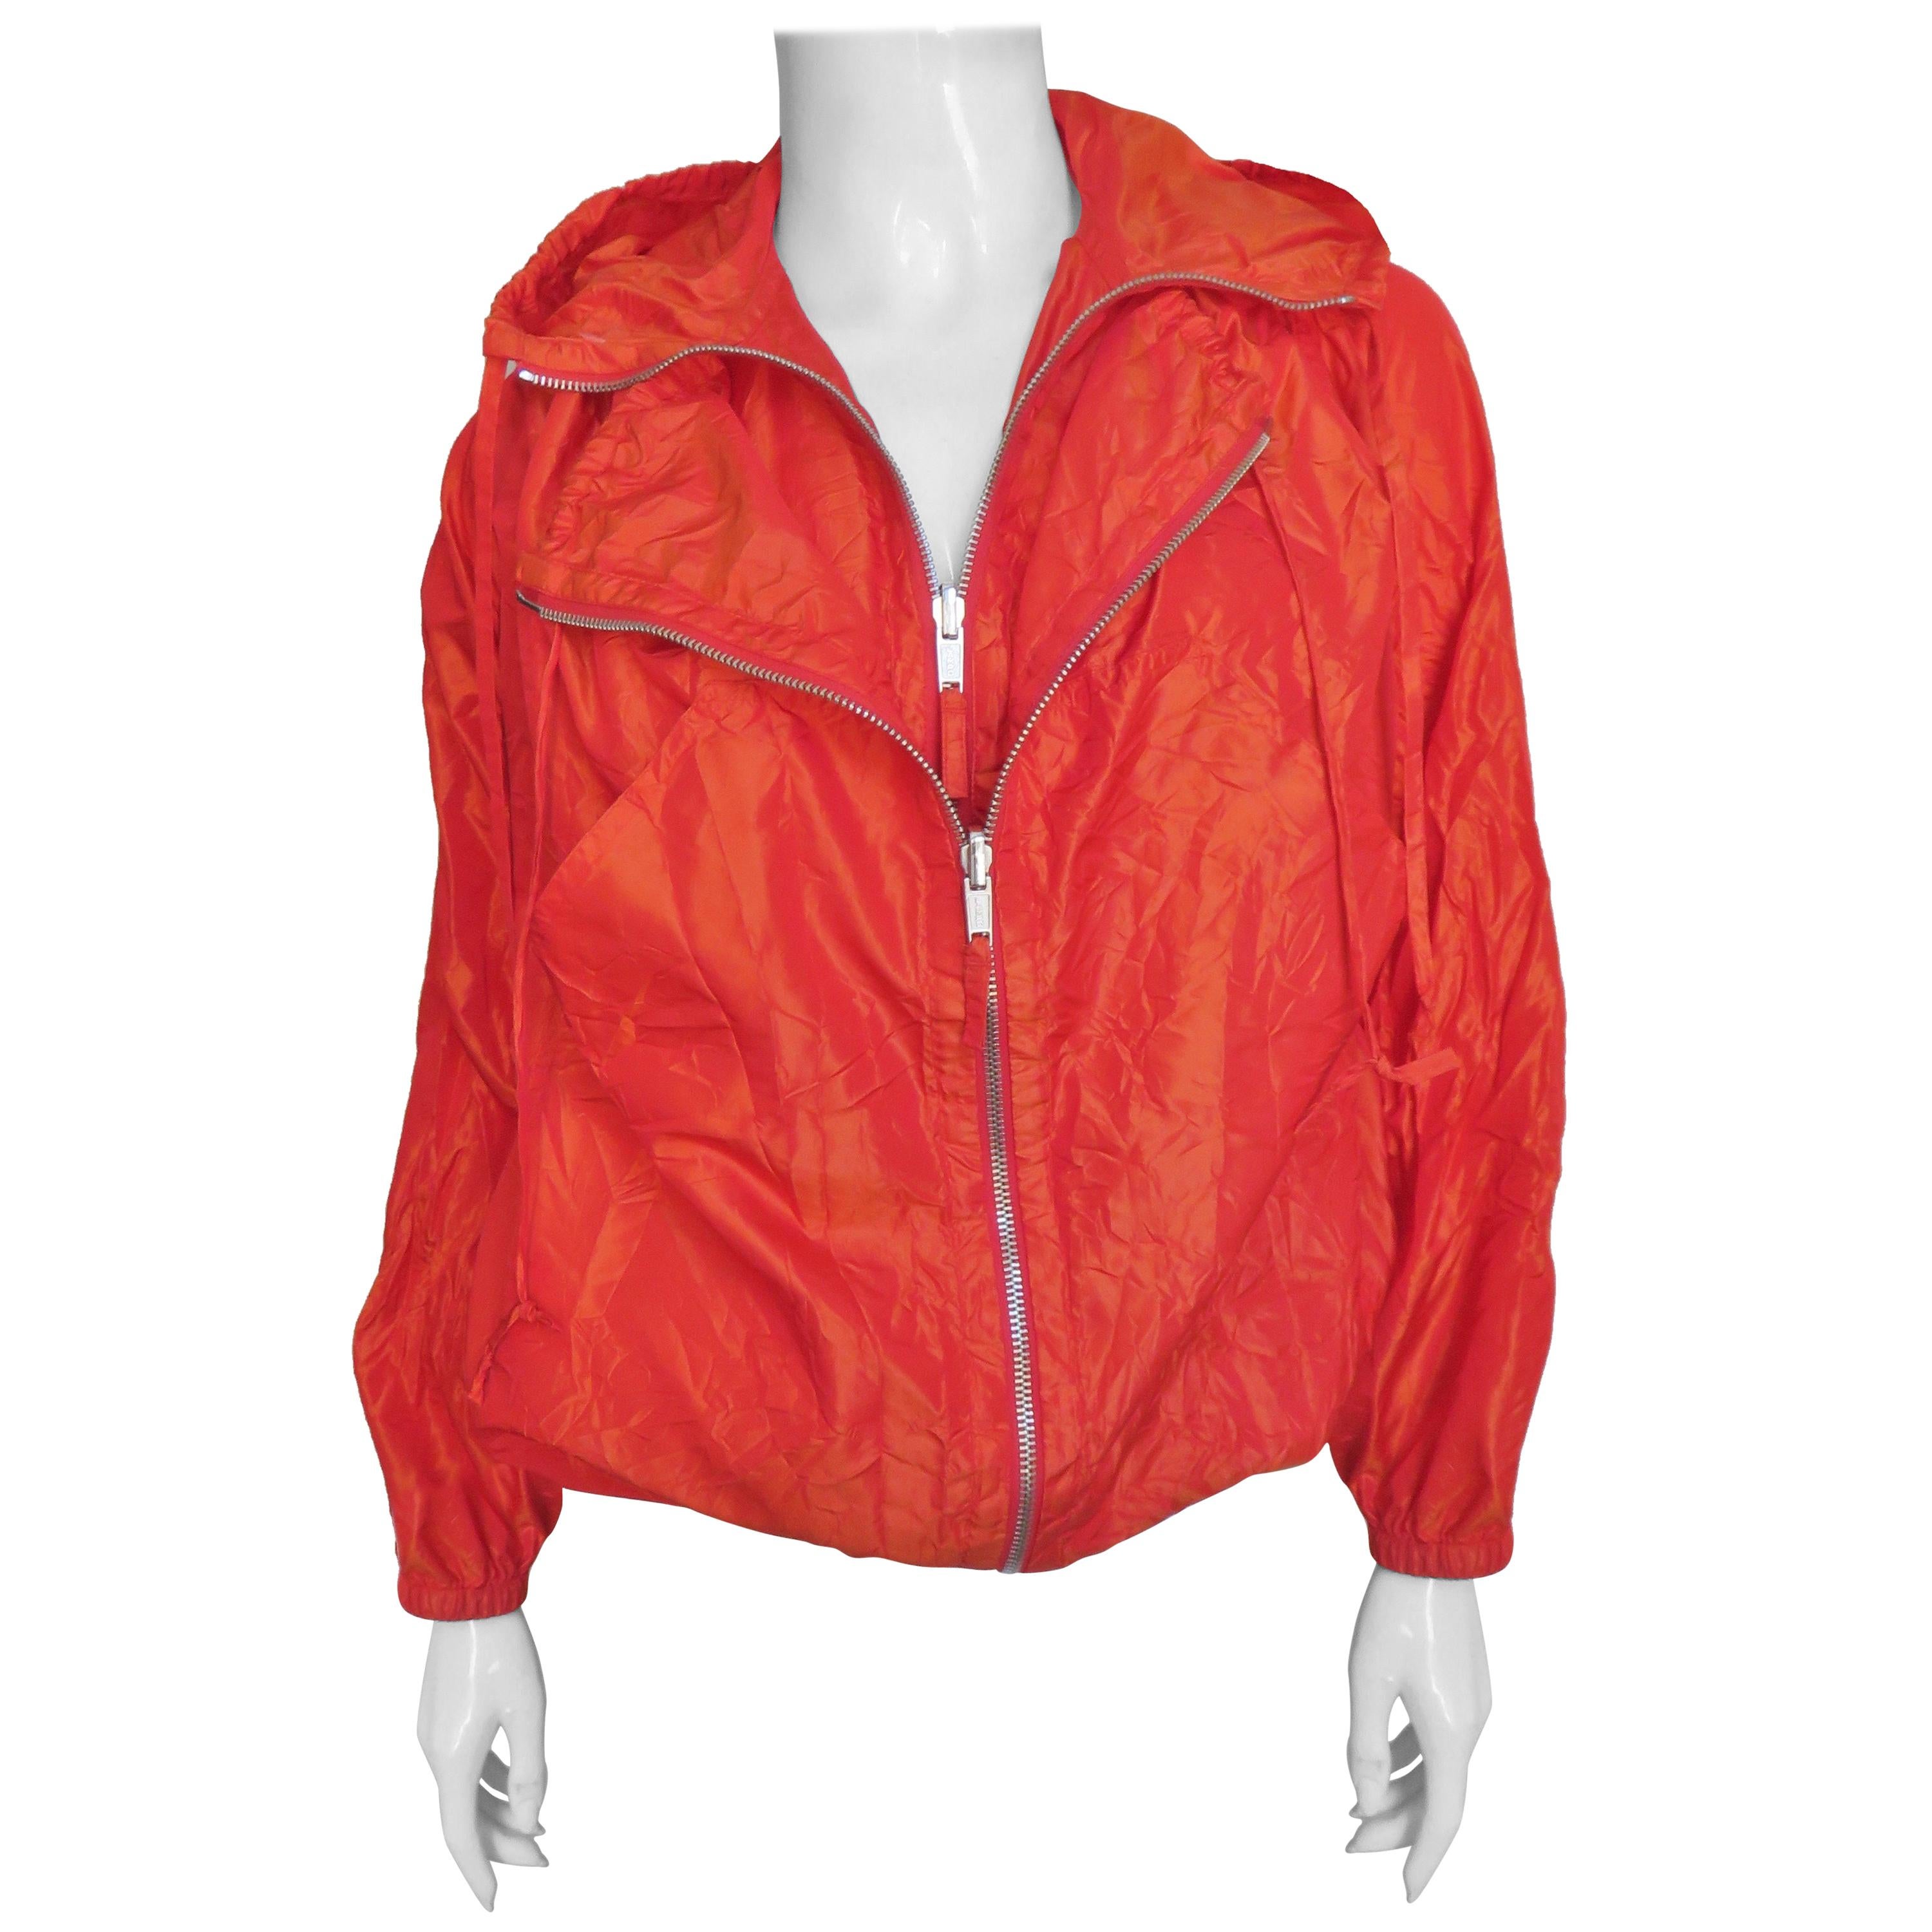 A fabulous orange sleeveless long vest/dress that folds up and becomes a long sleeve bomber jacket. There is a drawstring at the hem and hood and gathers at the waist which has stretch. When worn full length the sleeves tie at the back hem.  When